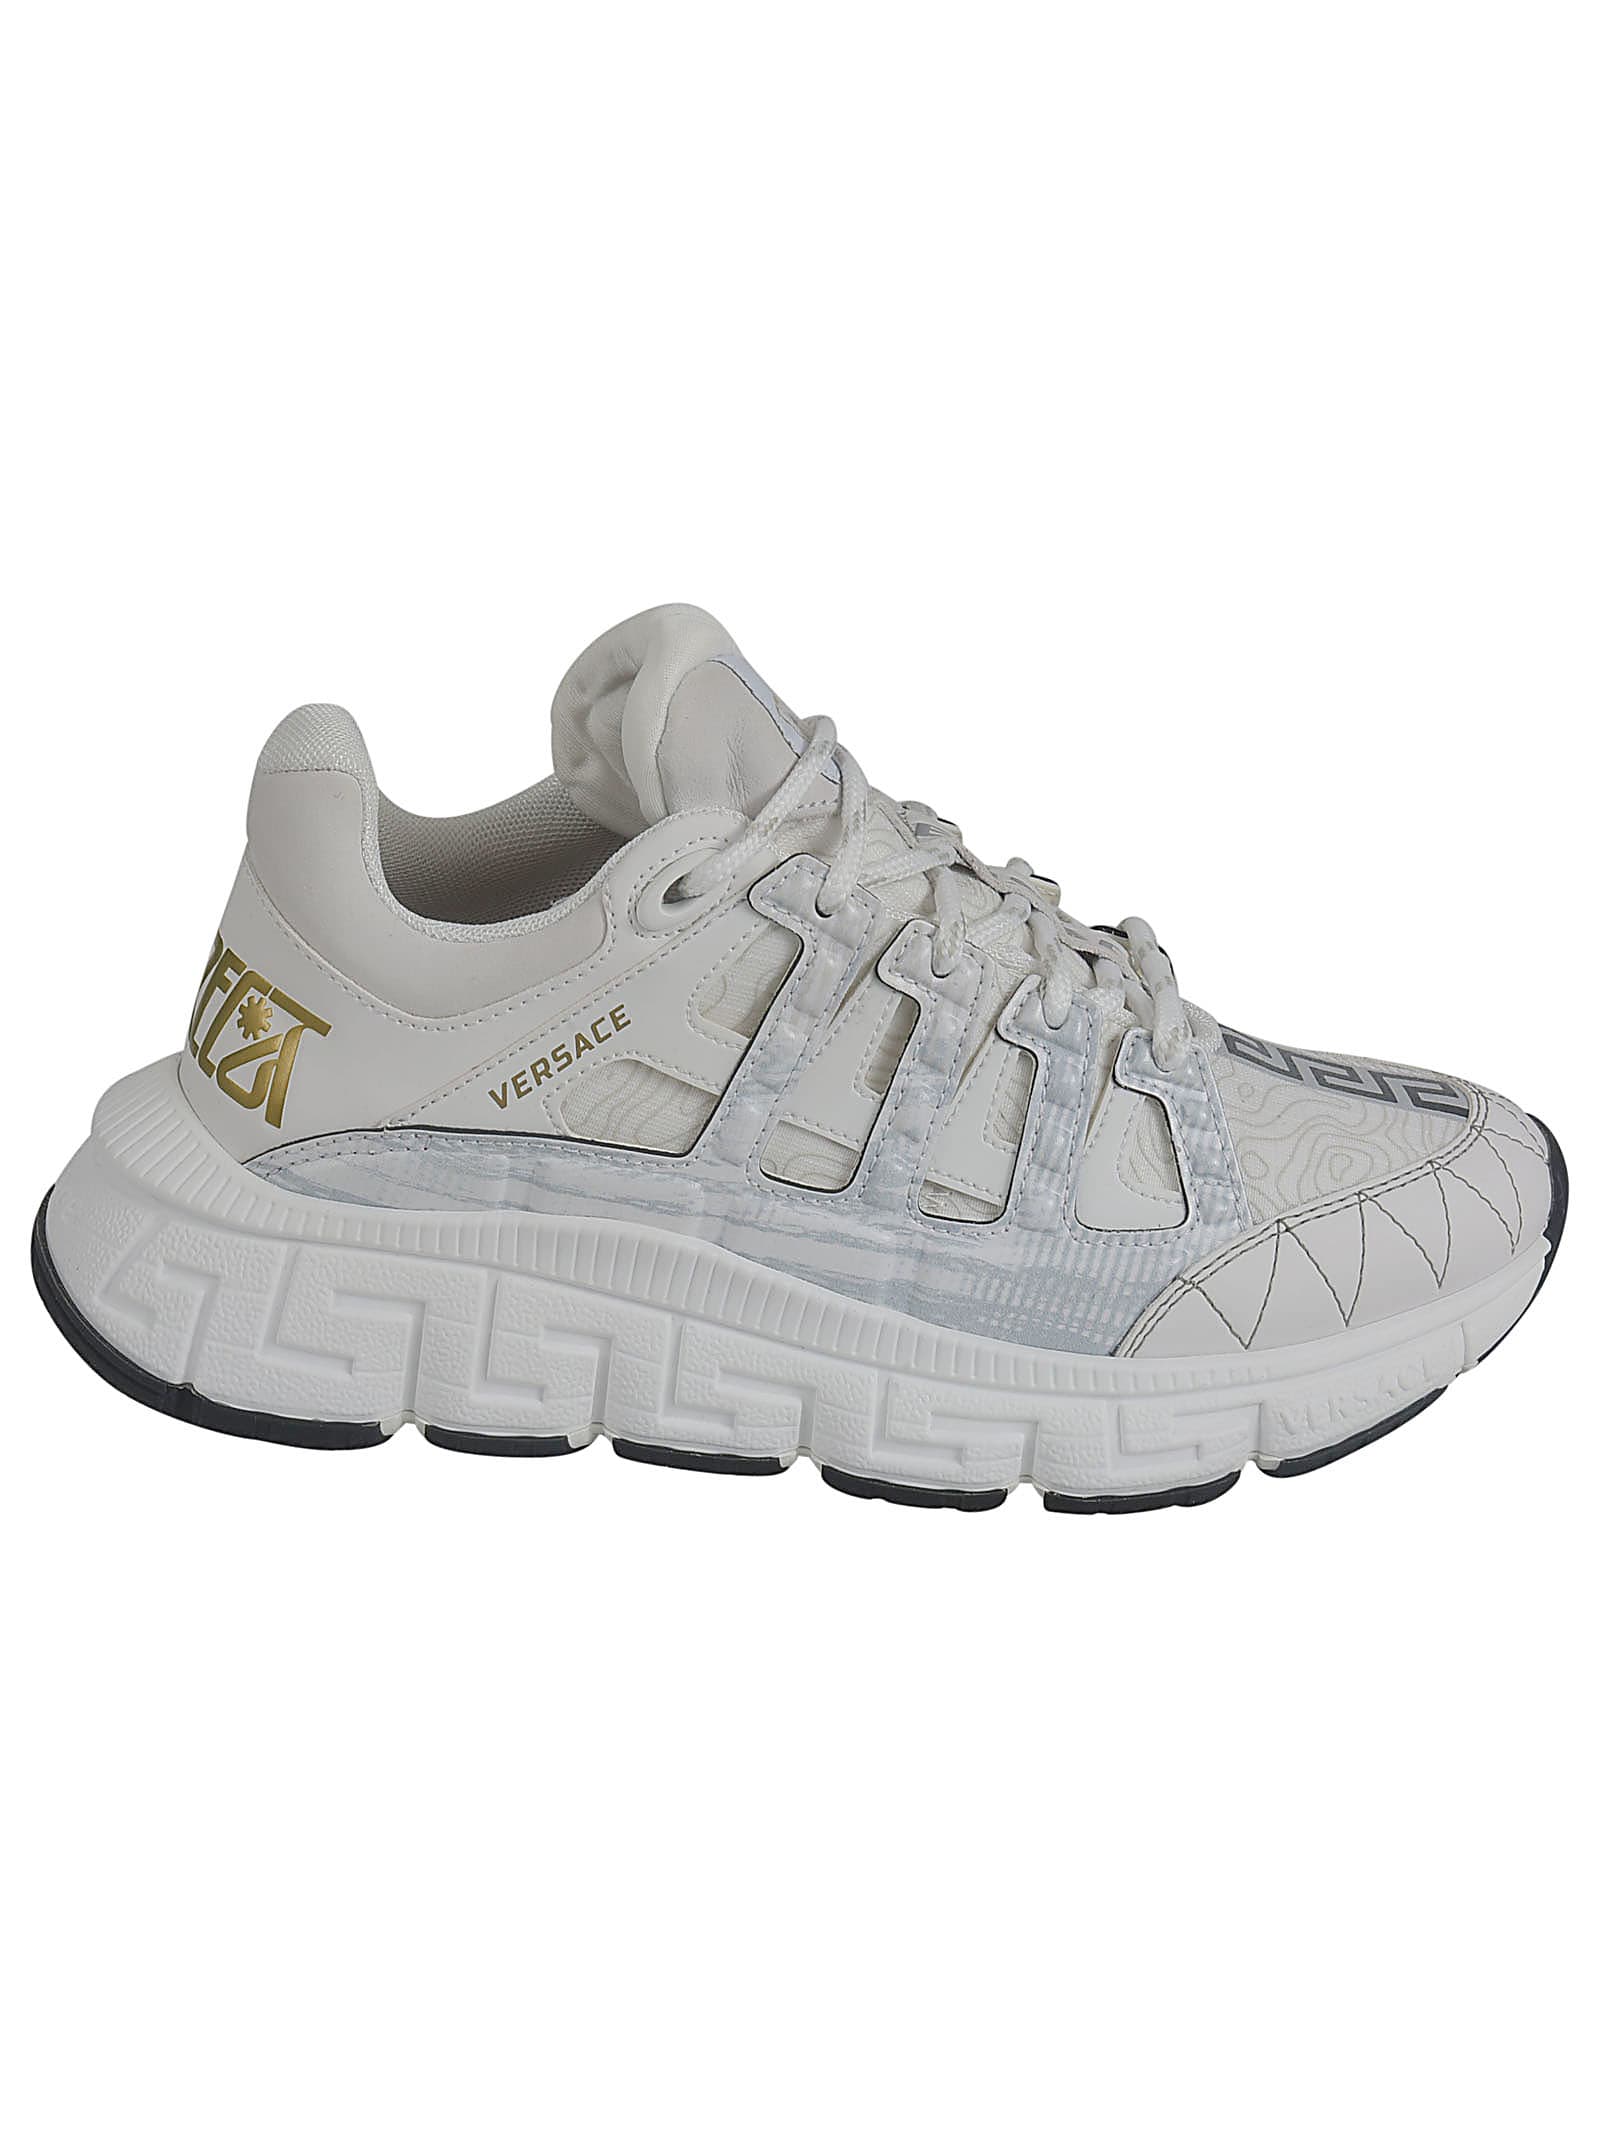 Buy Versace Trigreca Sneakers online, shop Versace shoes with free shipping